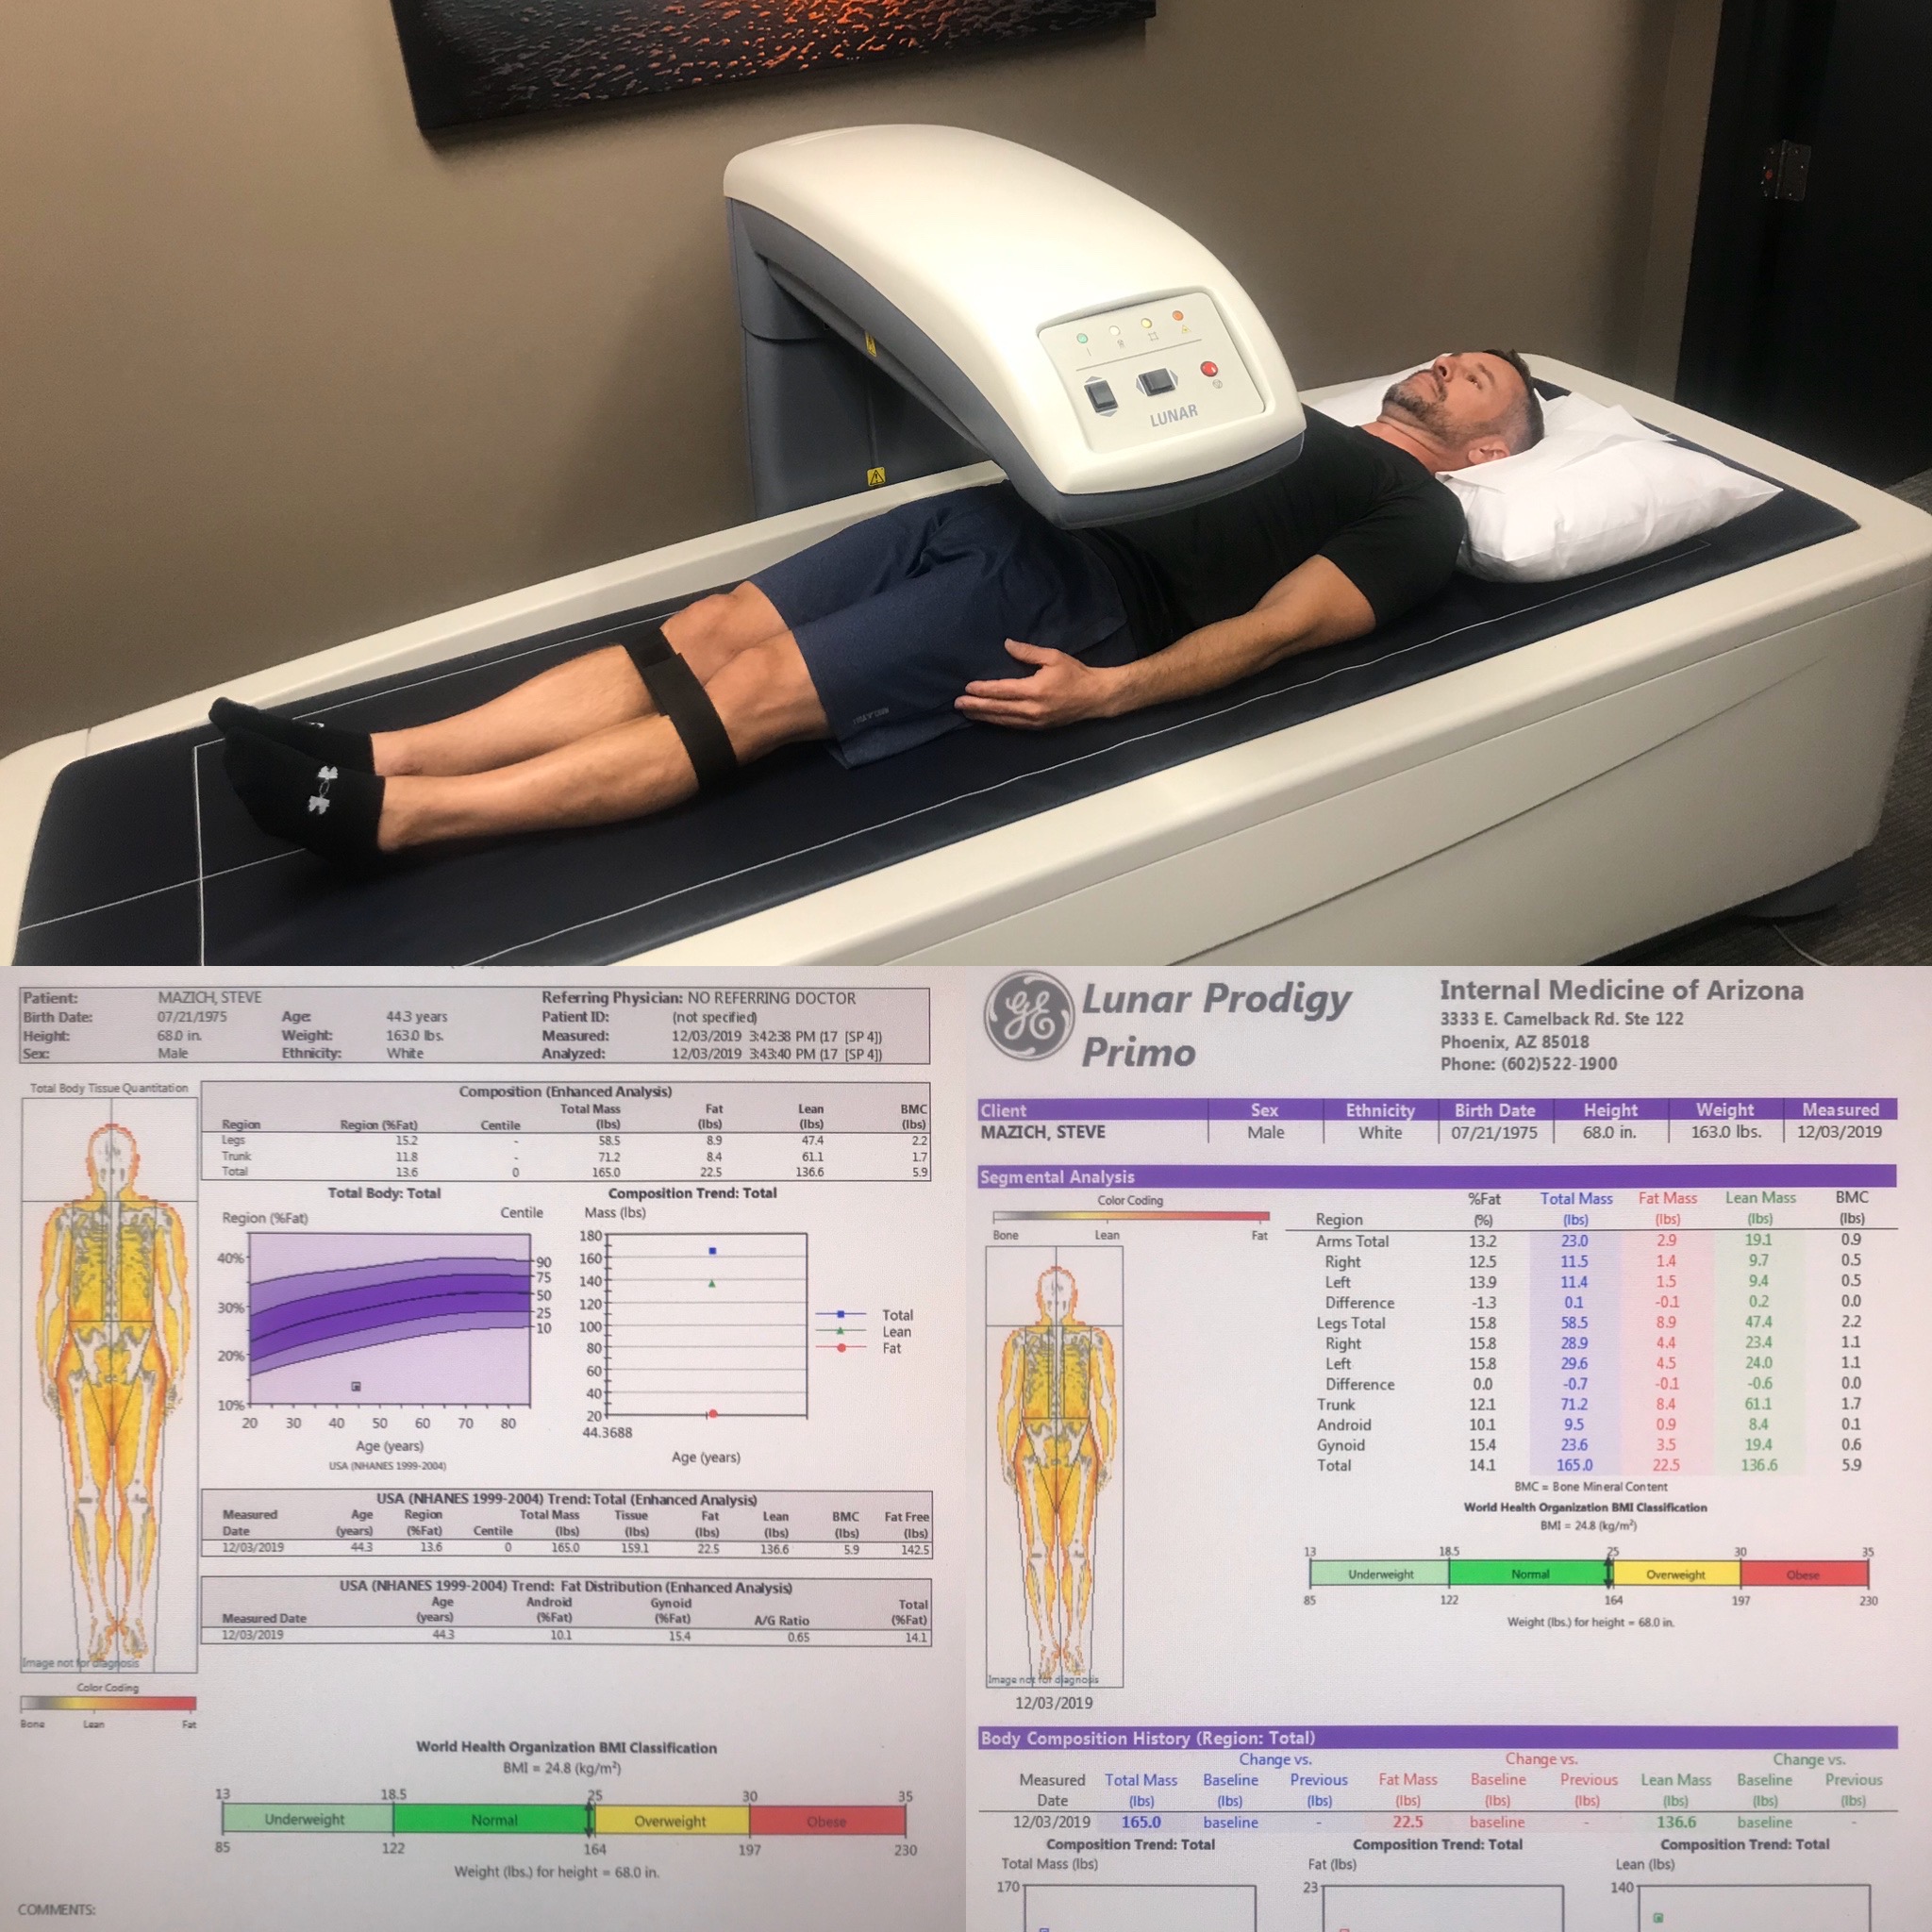 DEXA scan for muscle mass evaluation